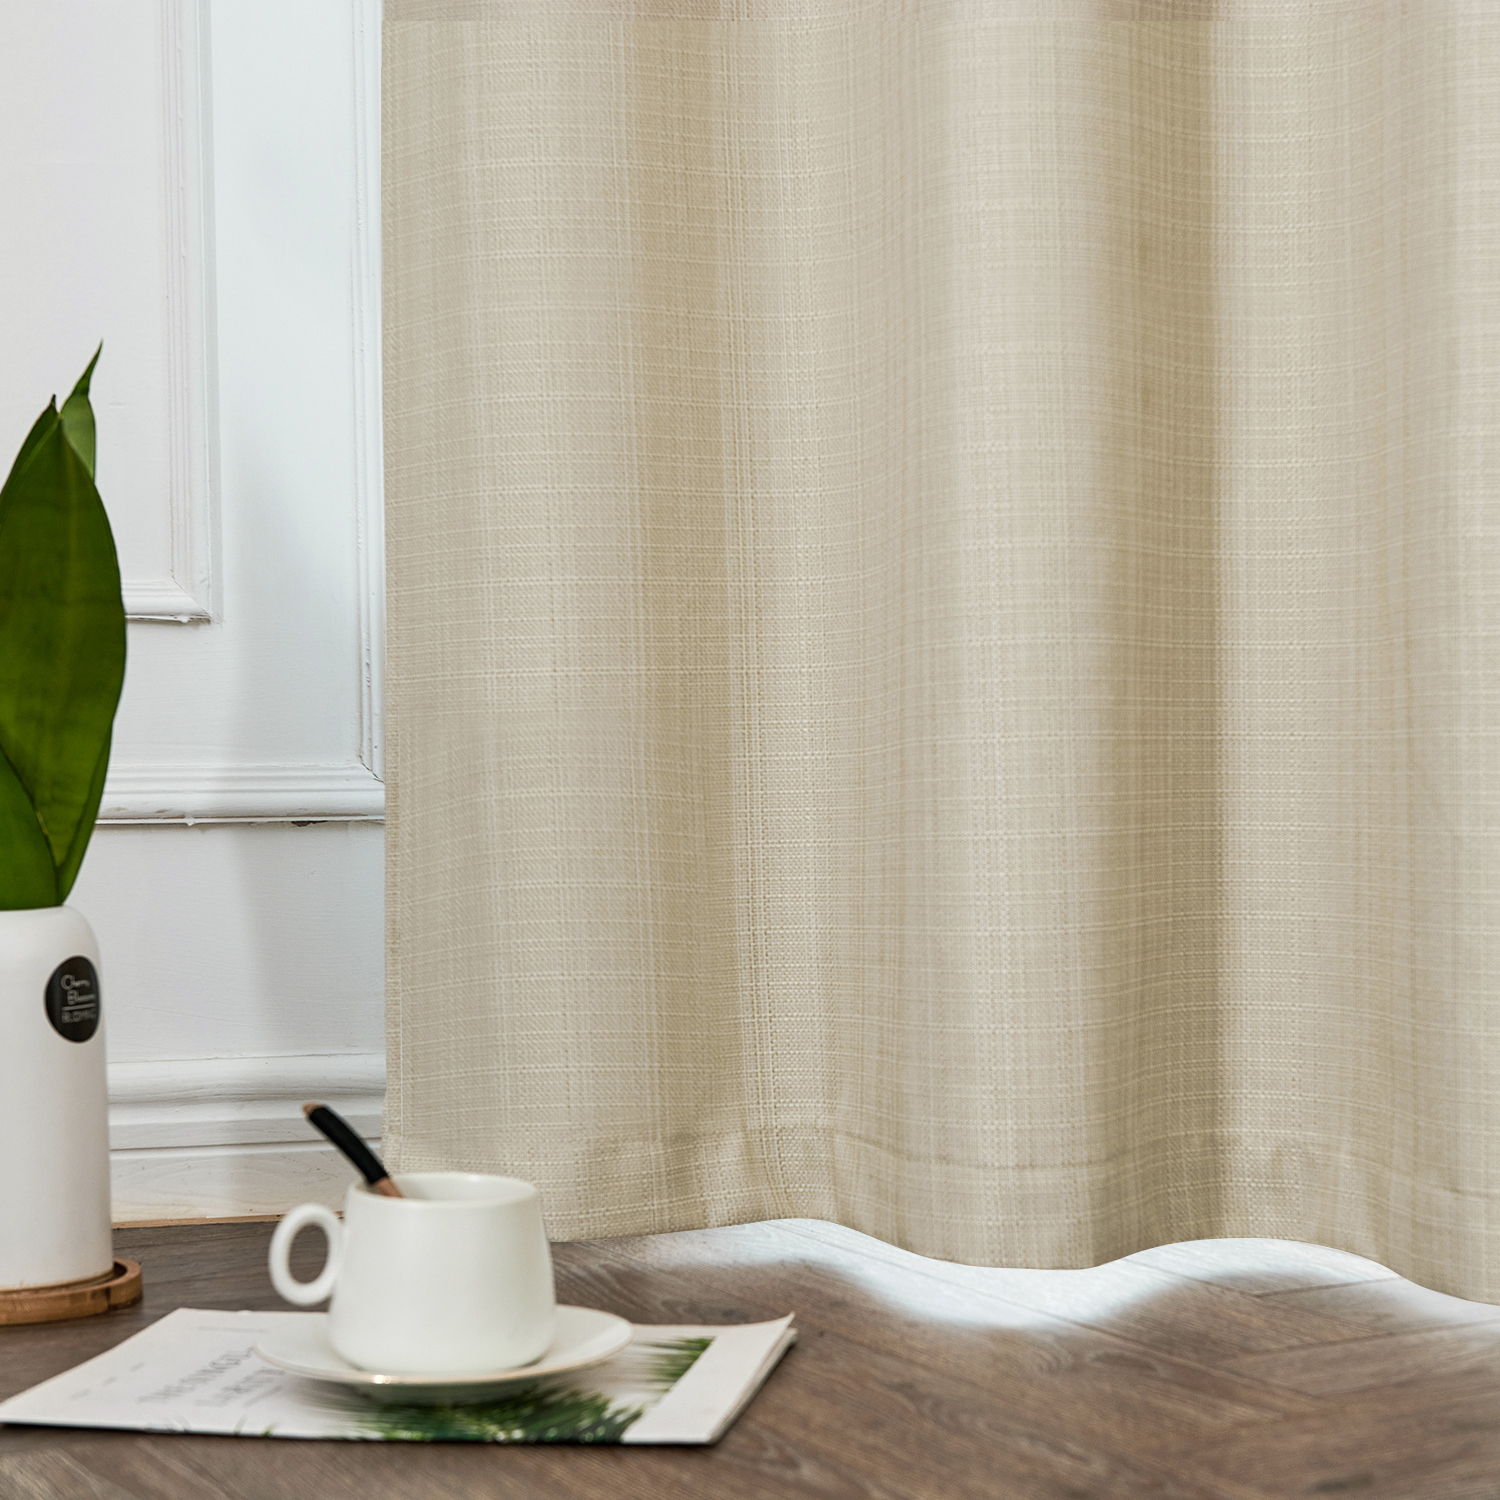 Curtainking Heathered Beige Curtains for Living Room 63 Inches Linen Textured Curtains Light Filtering Back Tab Curtains Casual Weave Back Tab Drapes 2 Panels - image 5 of 8